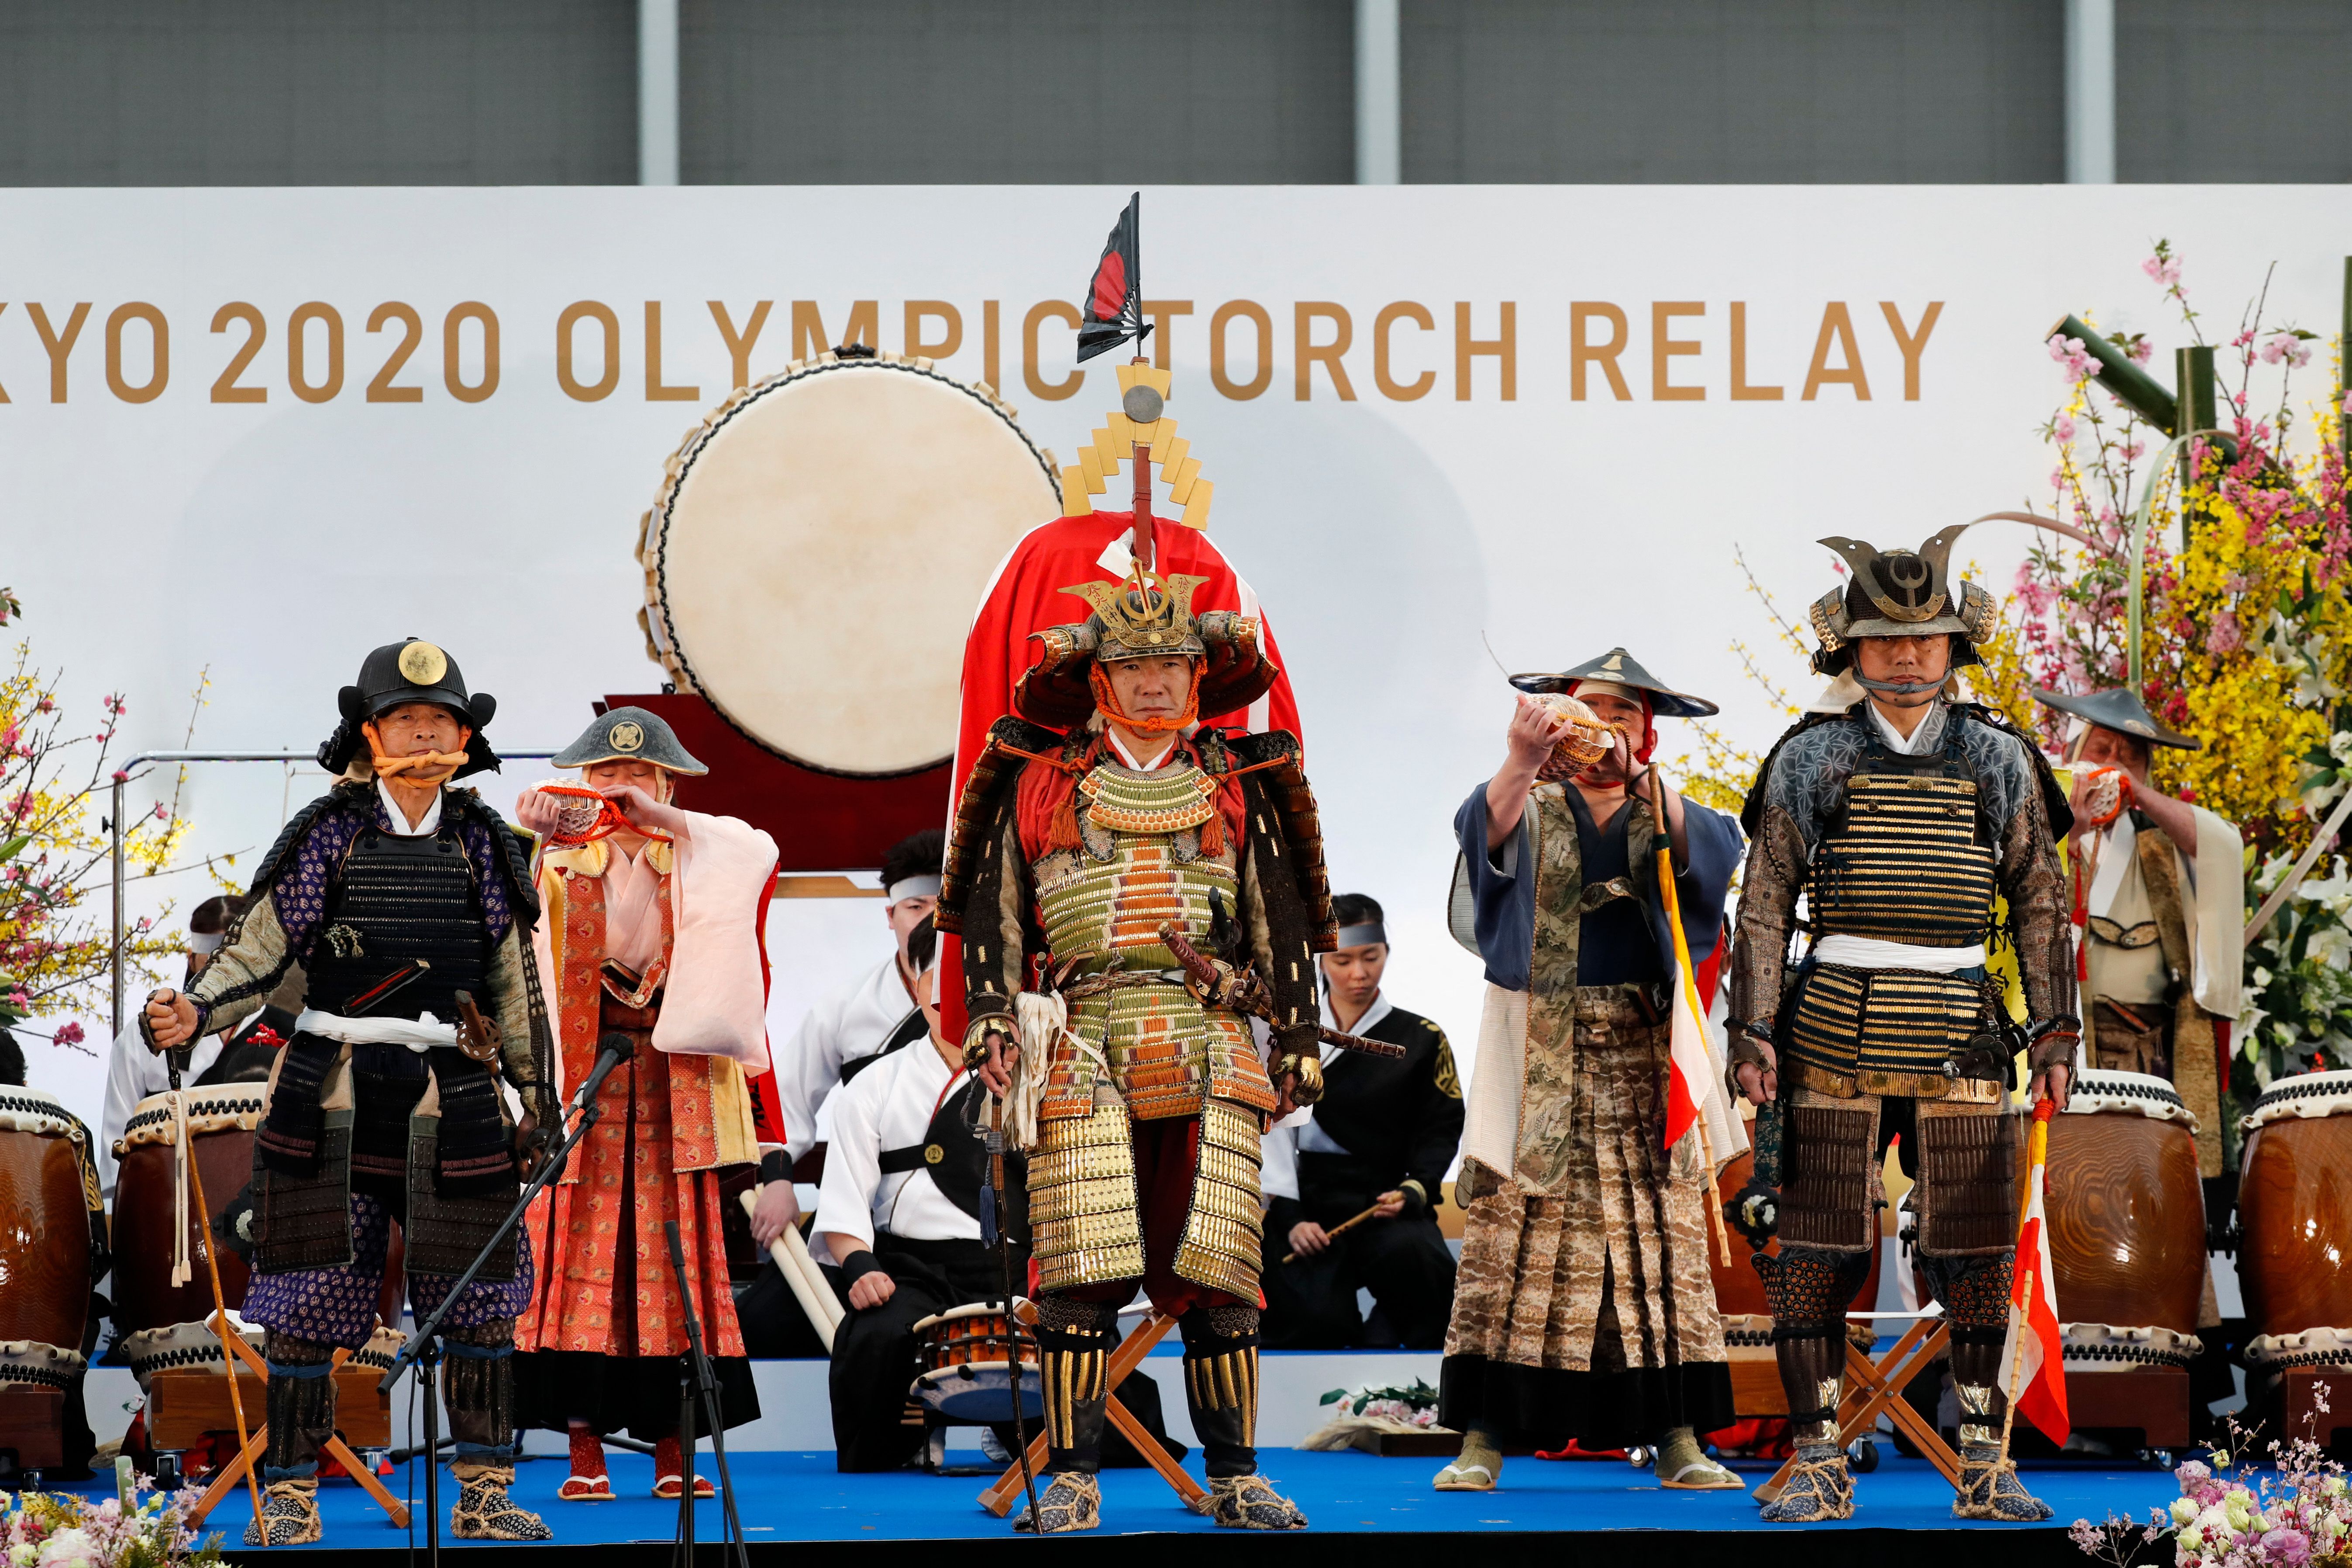 Members of Shinehago Equestrian Association perform during an opening ceremony on the first day of the Tokyo 2020 Olympic torch relay in Naraha, Fukushima